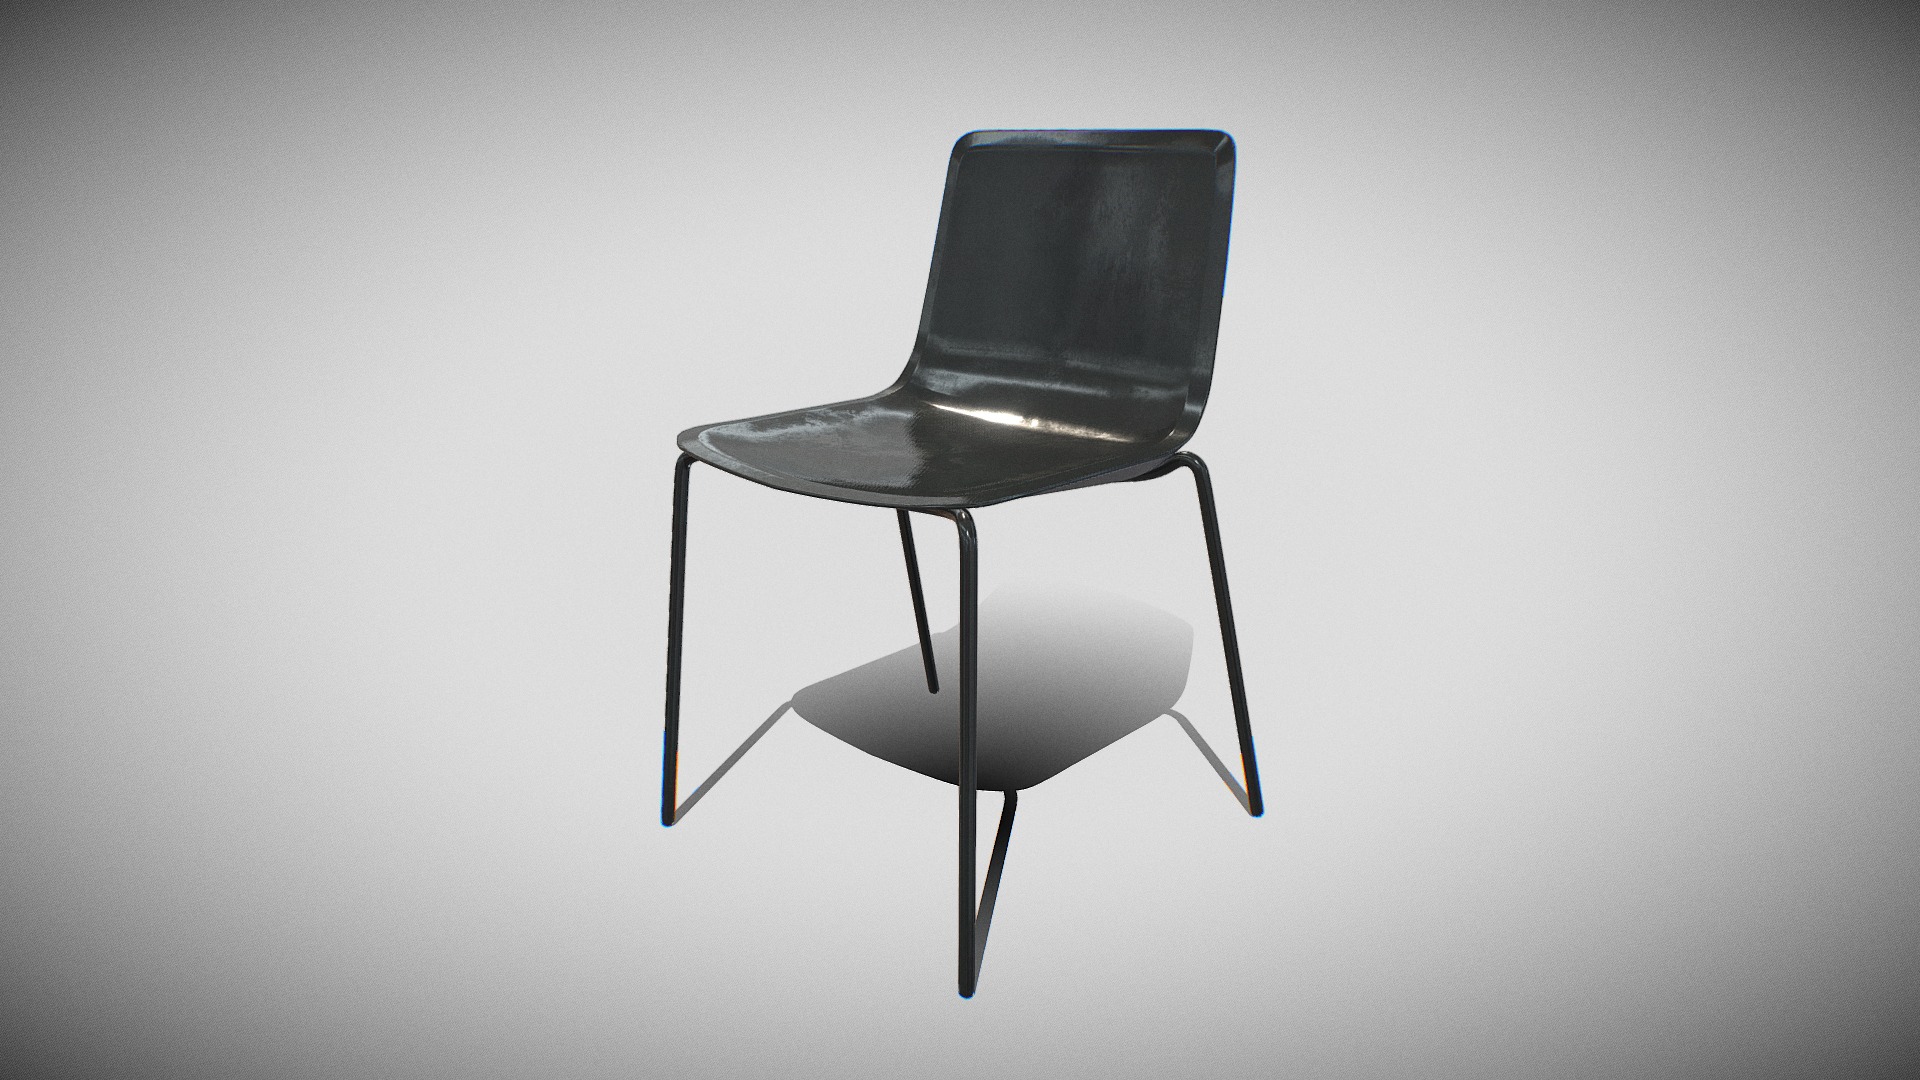 3D model PATO 4 Leg Chair-black painted - This is a 3D model of the PATO 4 Leg Chair-black painted. The 3D model is about a chair with a cushion.